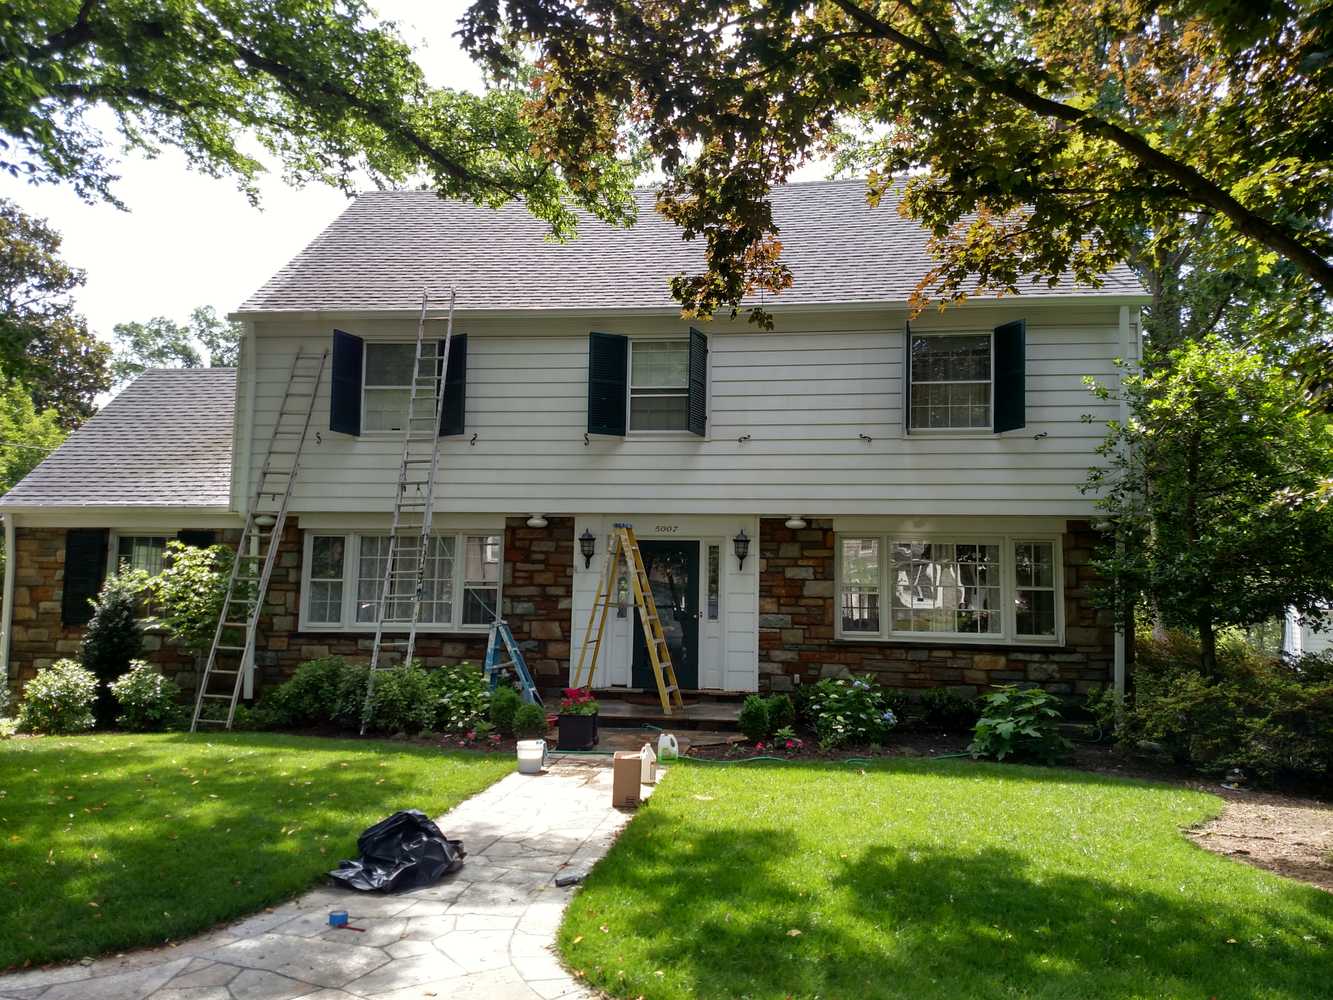 Interior and exterior painting and renovations